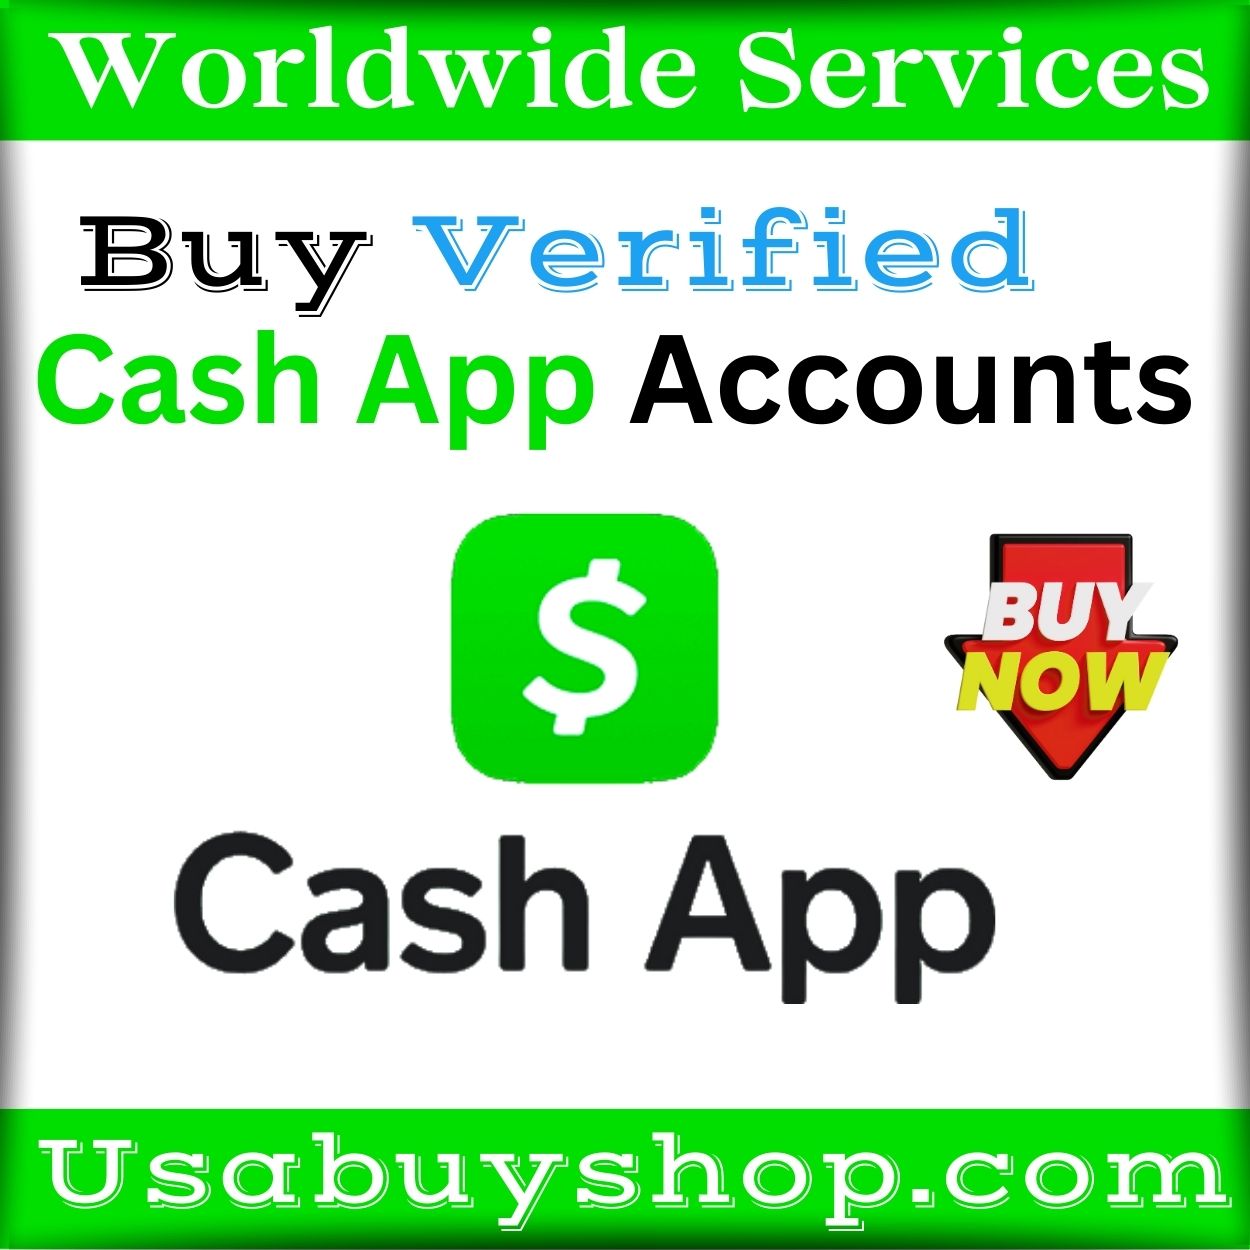 Buy Verified Cash App Accounts -100% Verified and Trusted Accounts